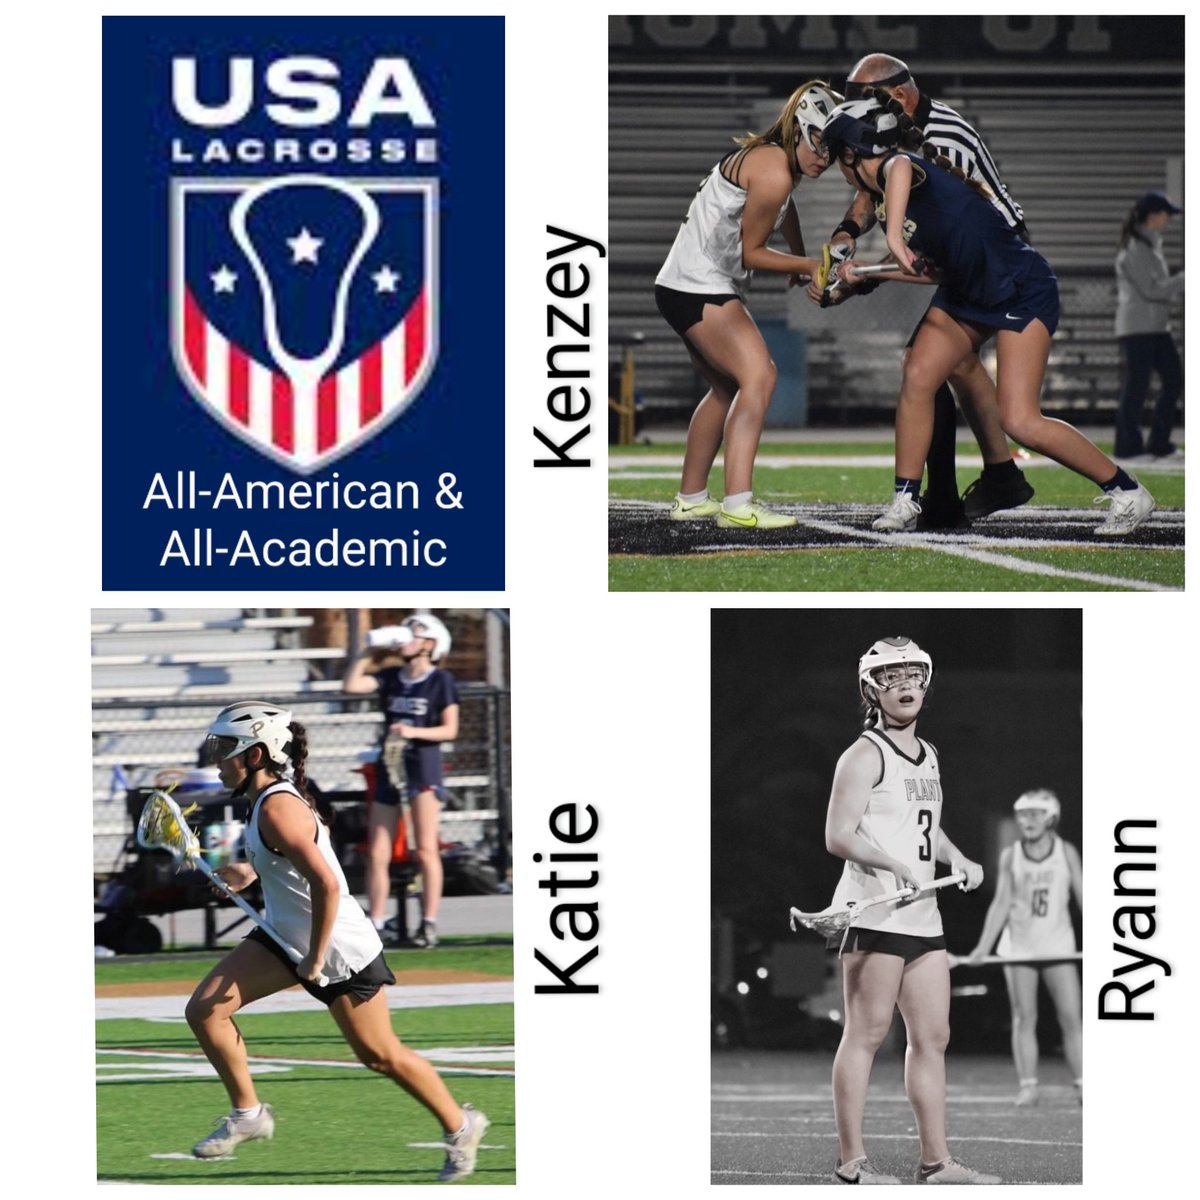 PLax coaches are proud to congratulate Kenzey Craig and Ryann McLeod for being named 2024 USAL All-Americans and Katie Fisher for being named a USAL Academic All-American. #PLax24 #GetOnTheBus @HBPlantAthletic @PlantHighSchool @phsathleticfdn @tampalaxreport @FloridaLX